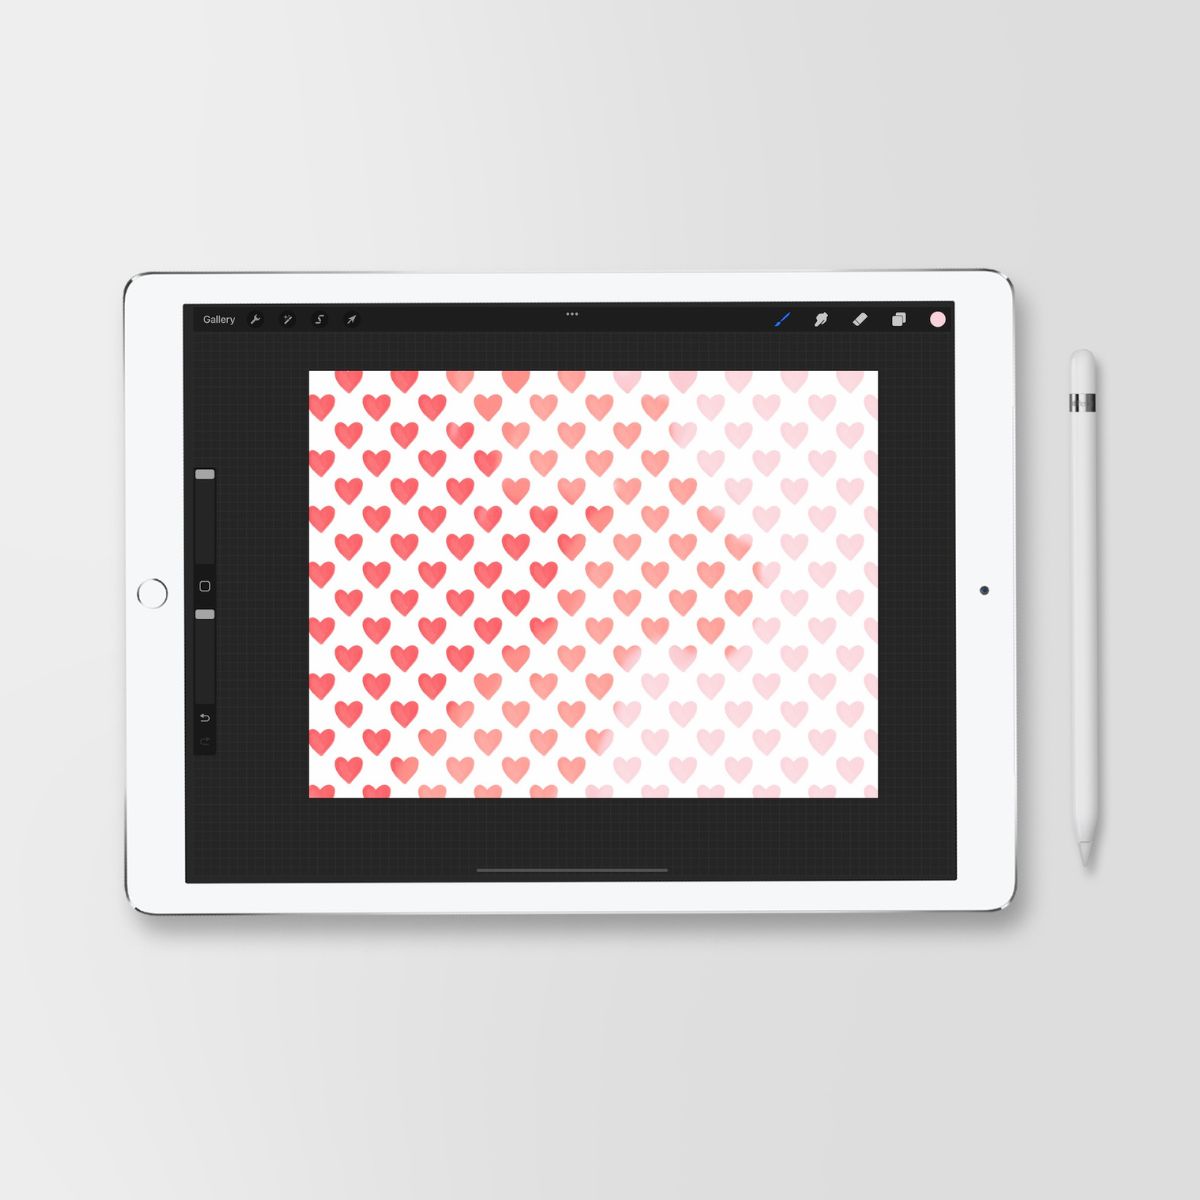 iPad with pink heart pattern